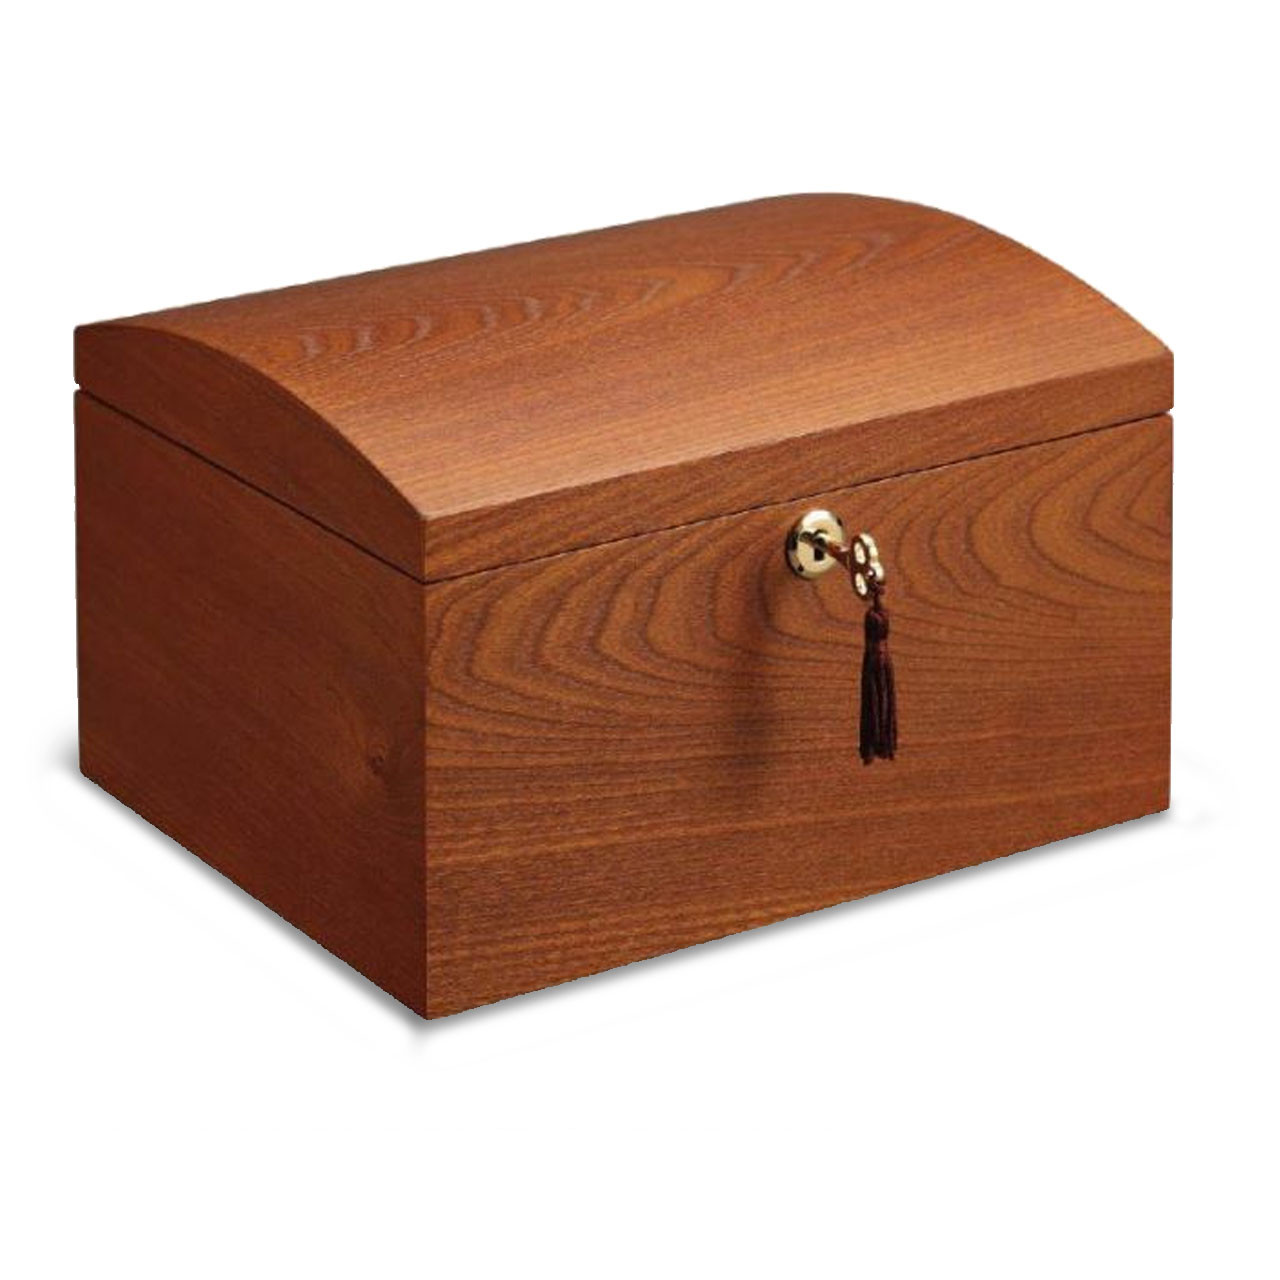 The Cambridge Urn Vault in Wood with Oak Finish